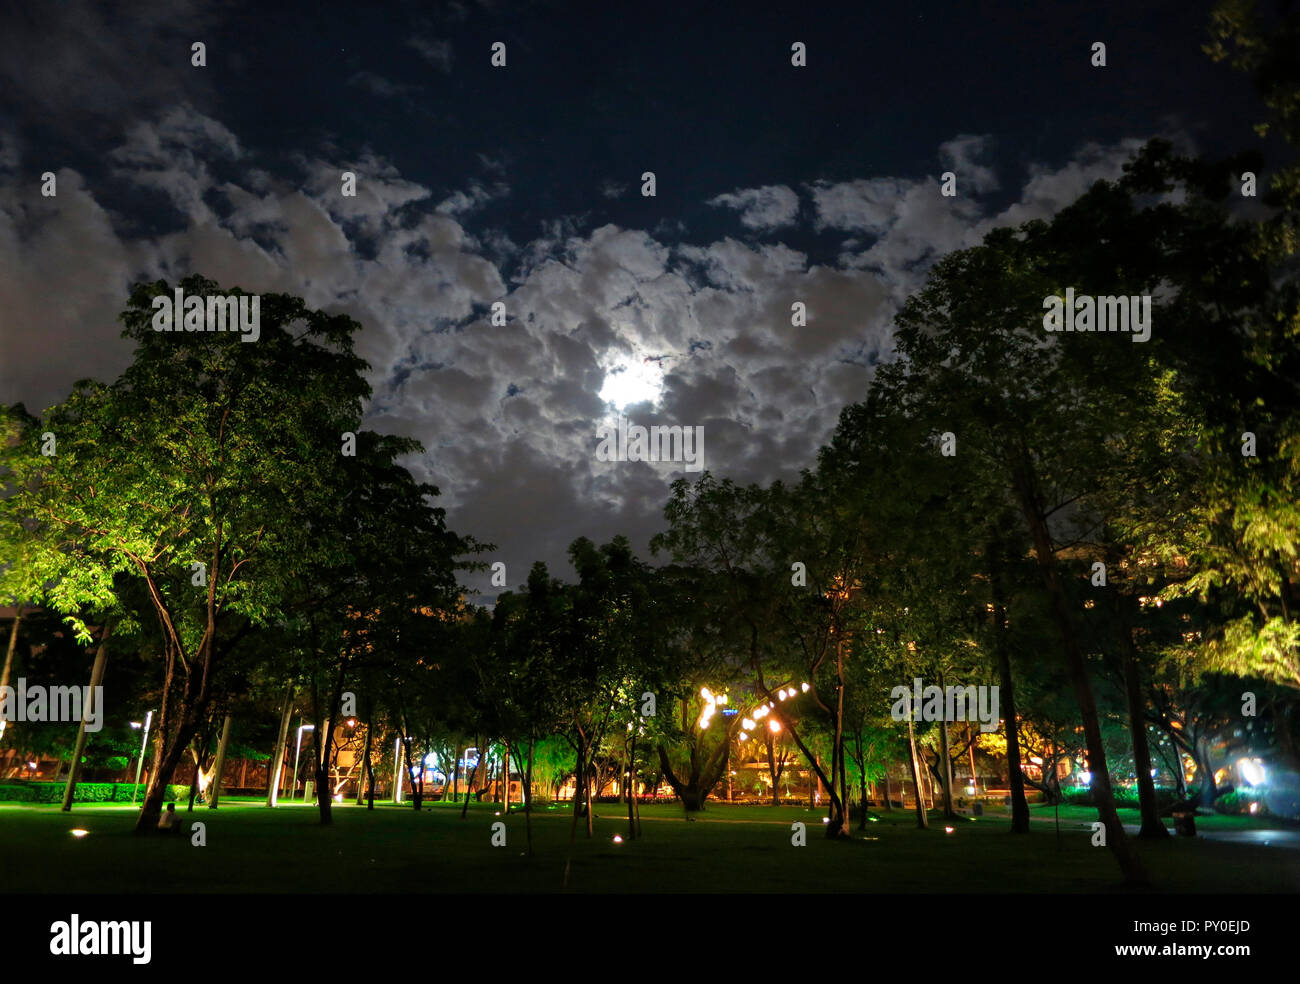 View of trees in Ayala Triangle Park at night in Makati, Philippines Stock Photo